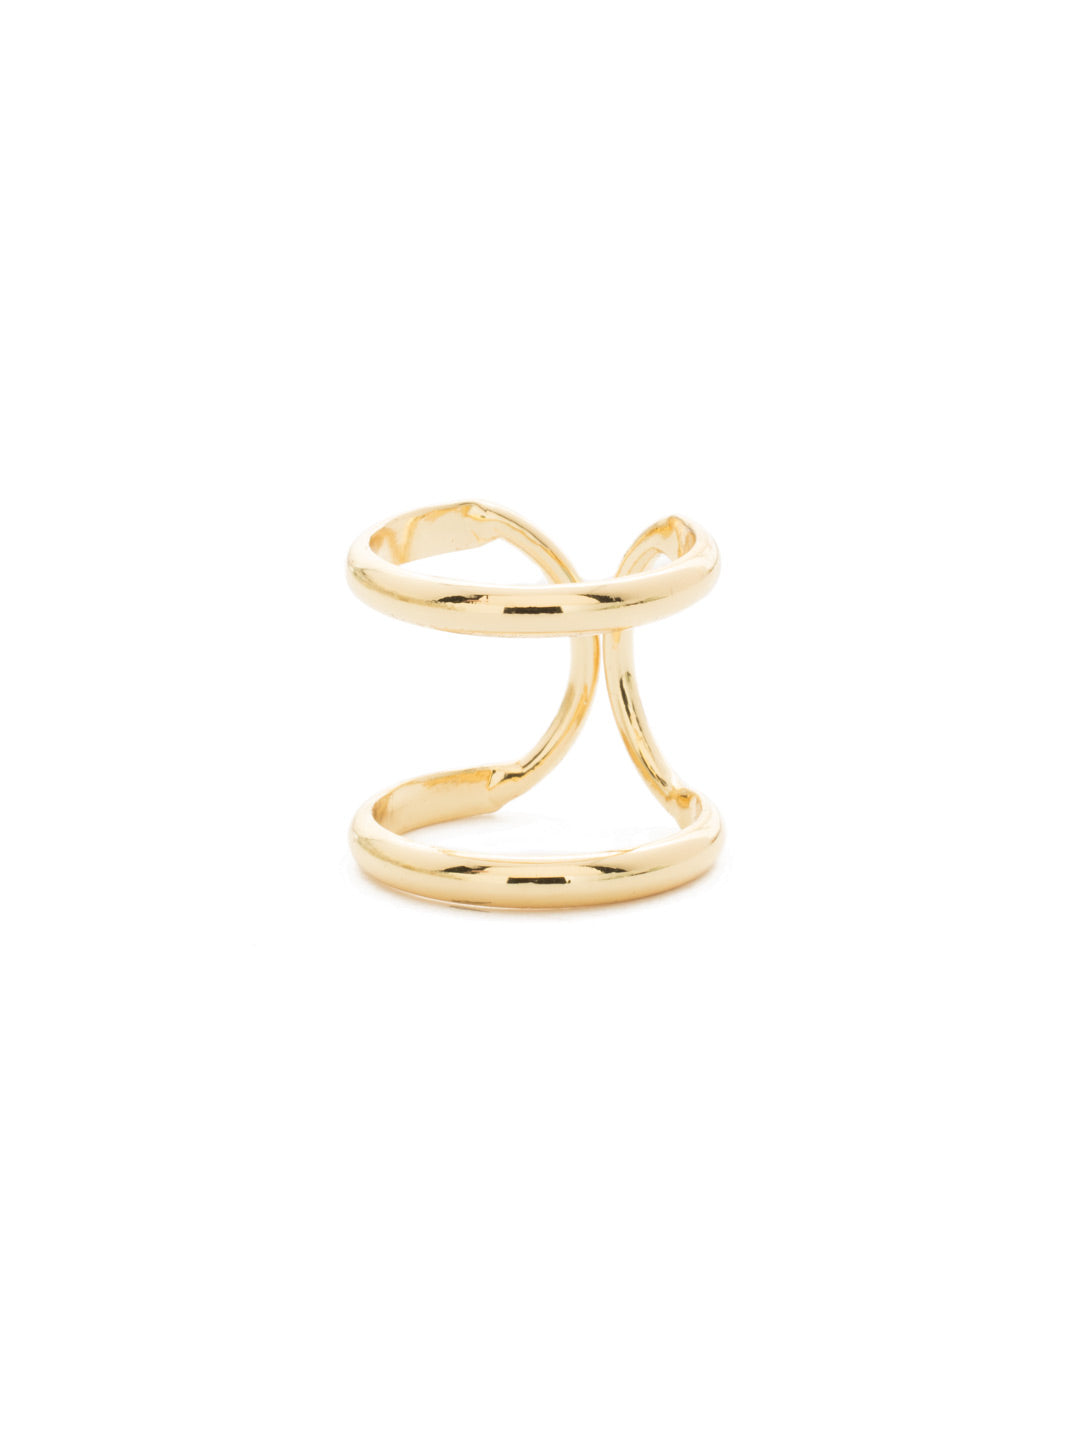 Running In Circles Stacked Ring - RDW3BGCRY